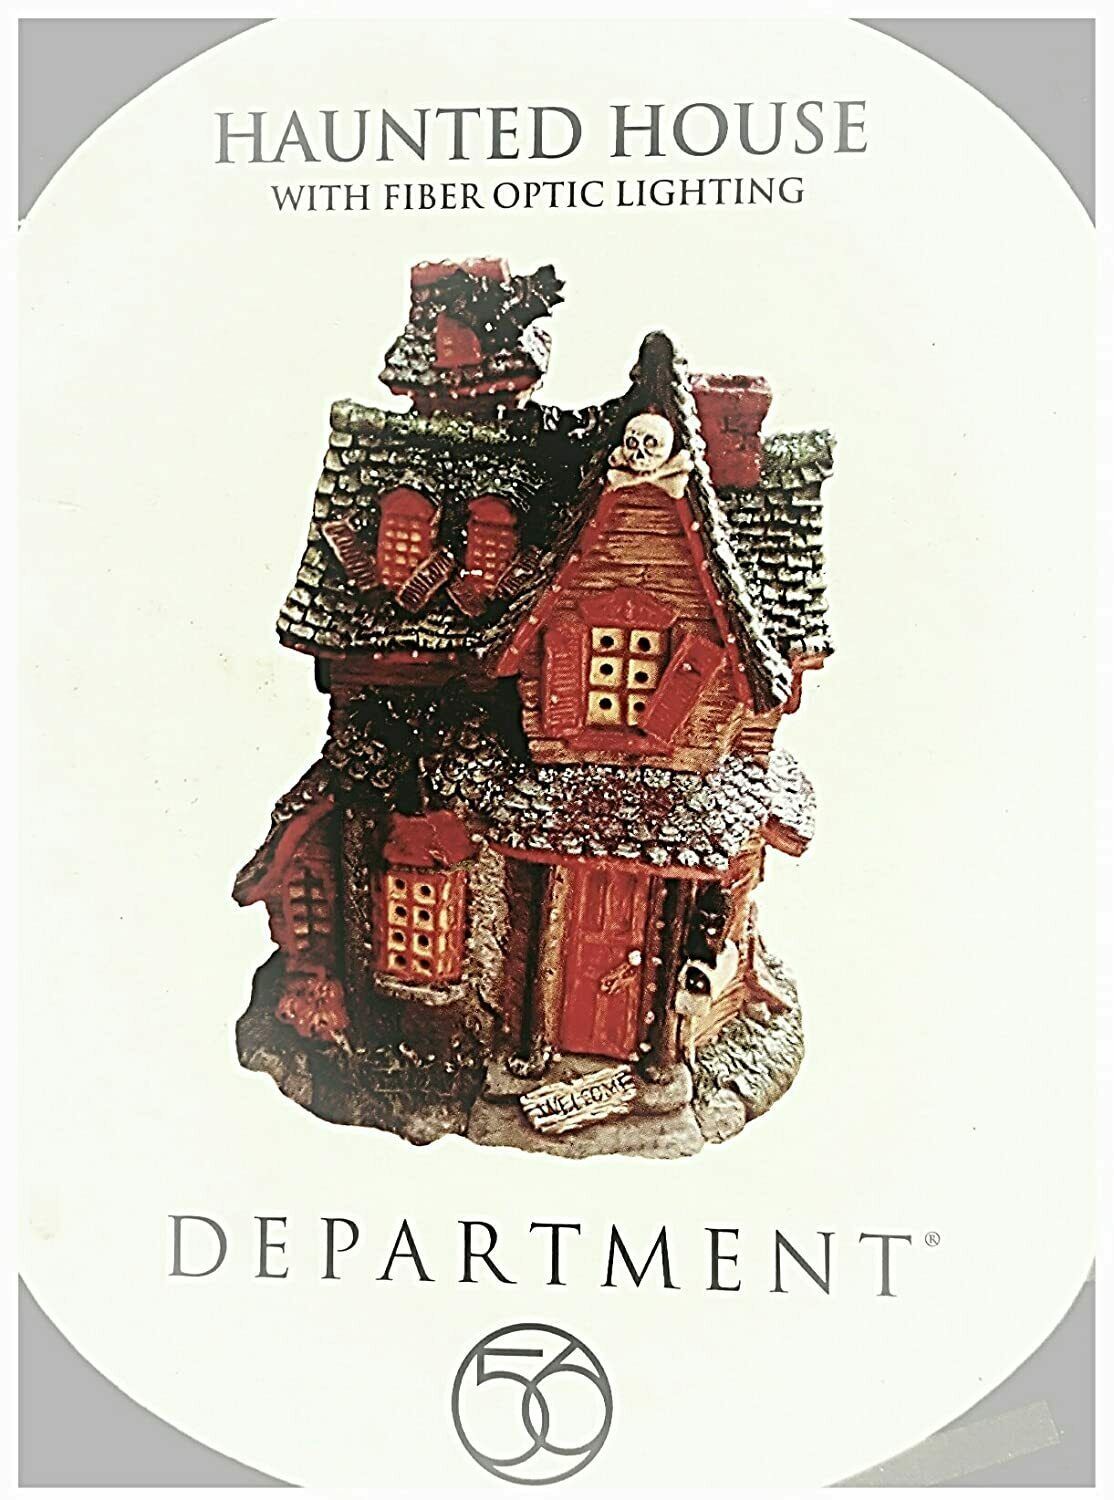 Department 56 Haunted House with Fiber Optic Lighting No. 56.3366 - $129.99